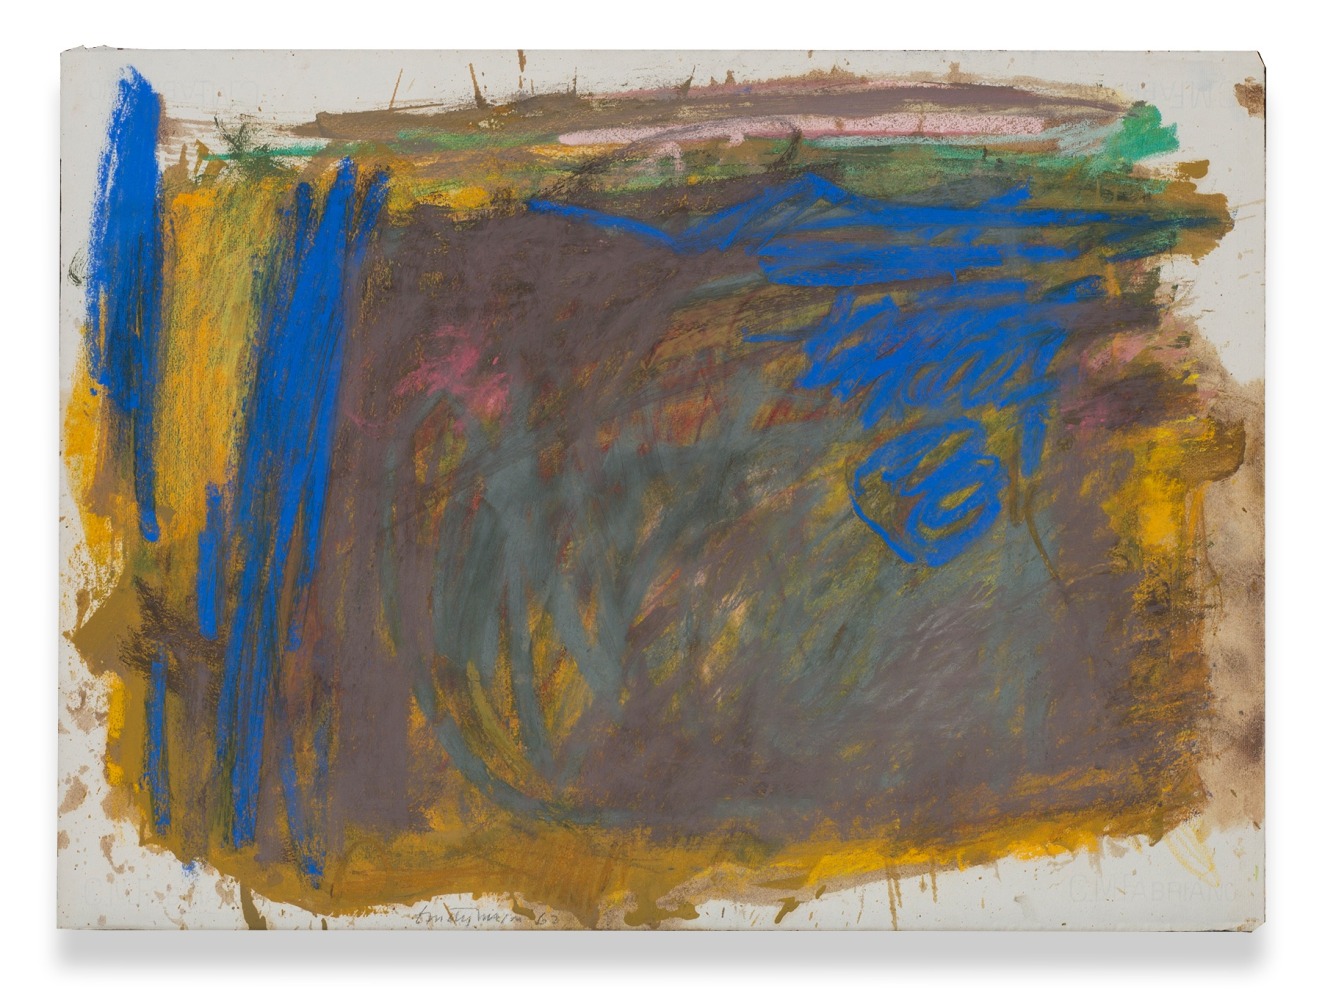 Emily Mason

Untitled, 1962

Oil and pastel on paper

18 3/4h x 25 3/4w in

EM008